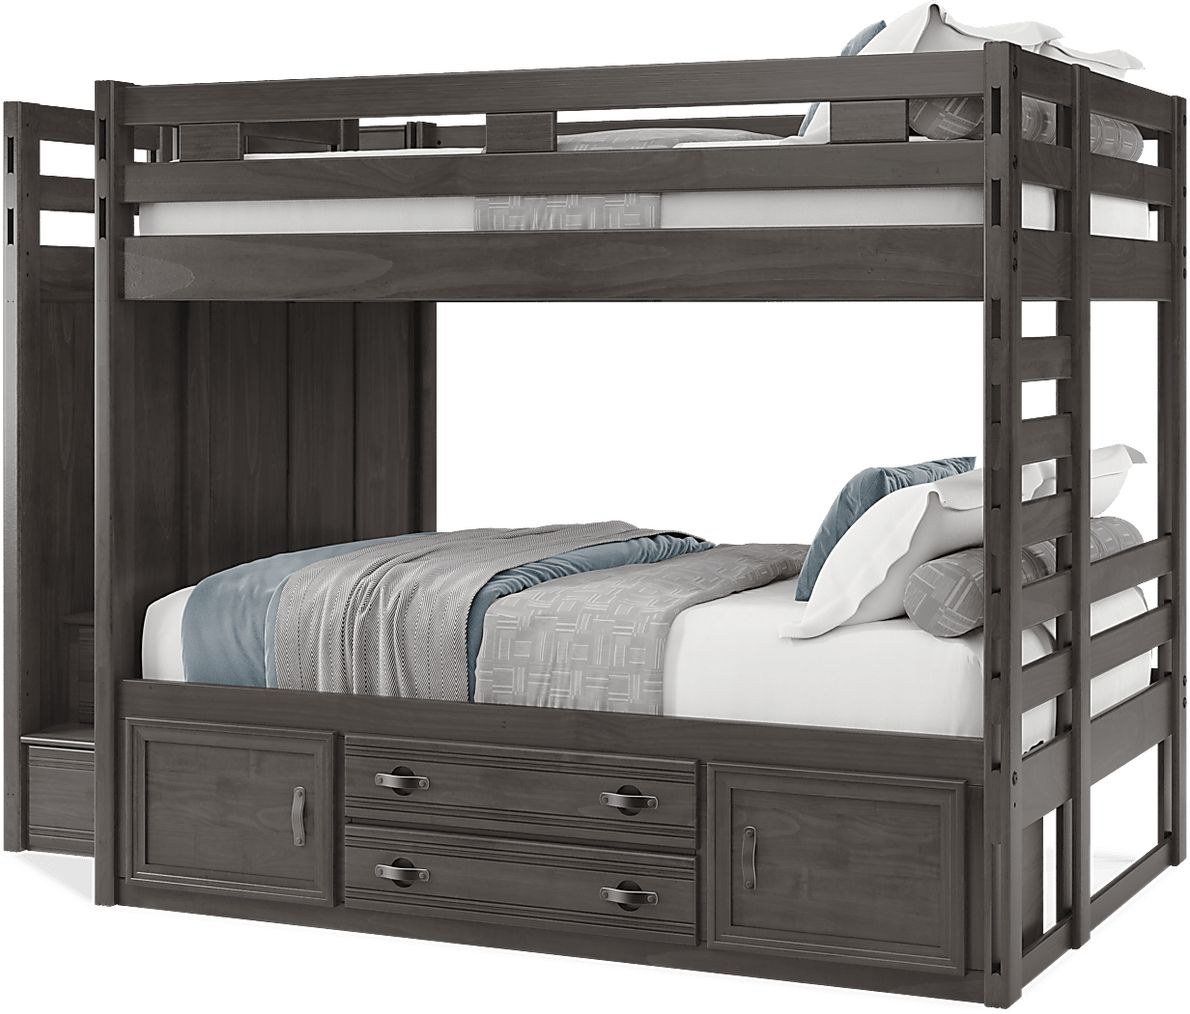 Kids Creekside 2.0 Charcoal Full/Full Step Bunk Bed with Storage Rail